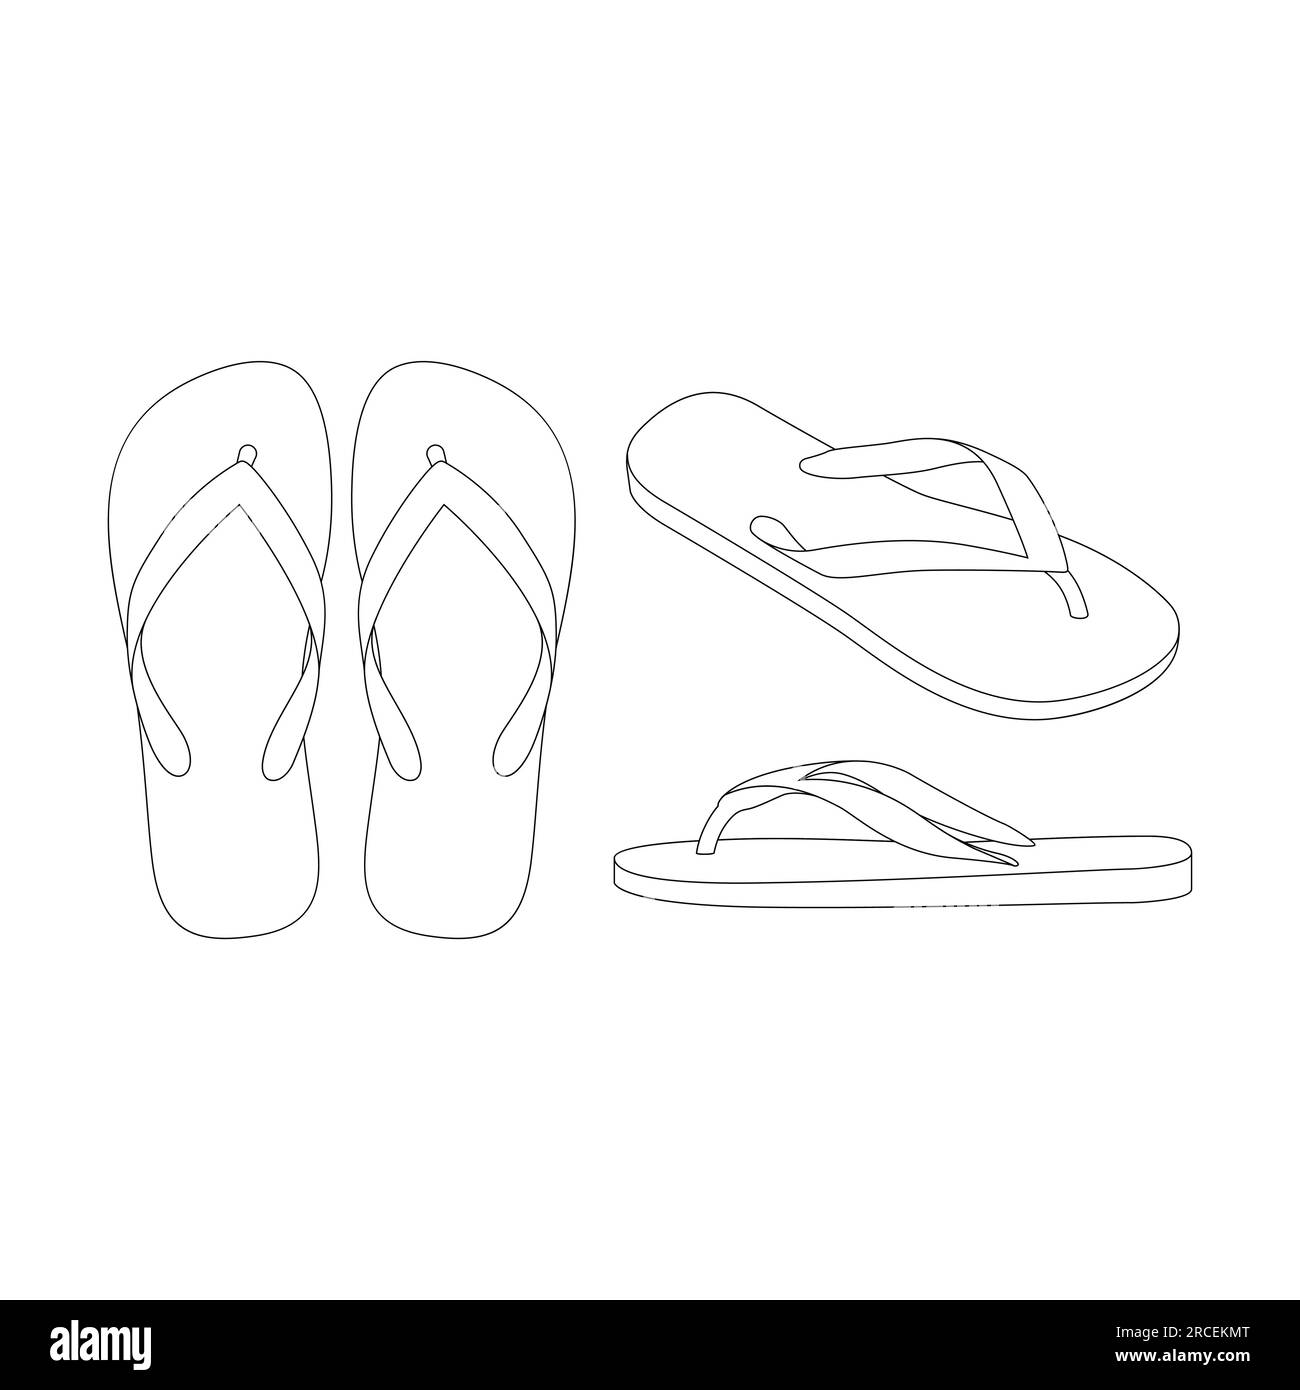 Hand drawn sketch with children's slippers. vector illustration. | CanStock